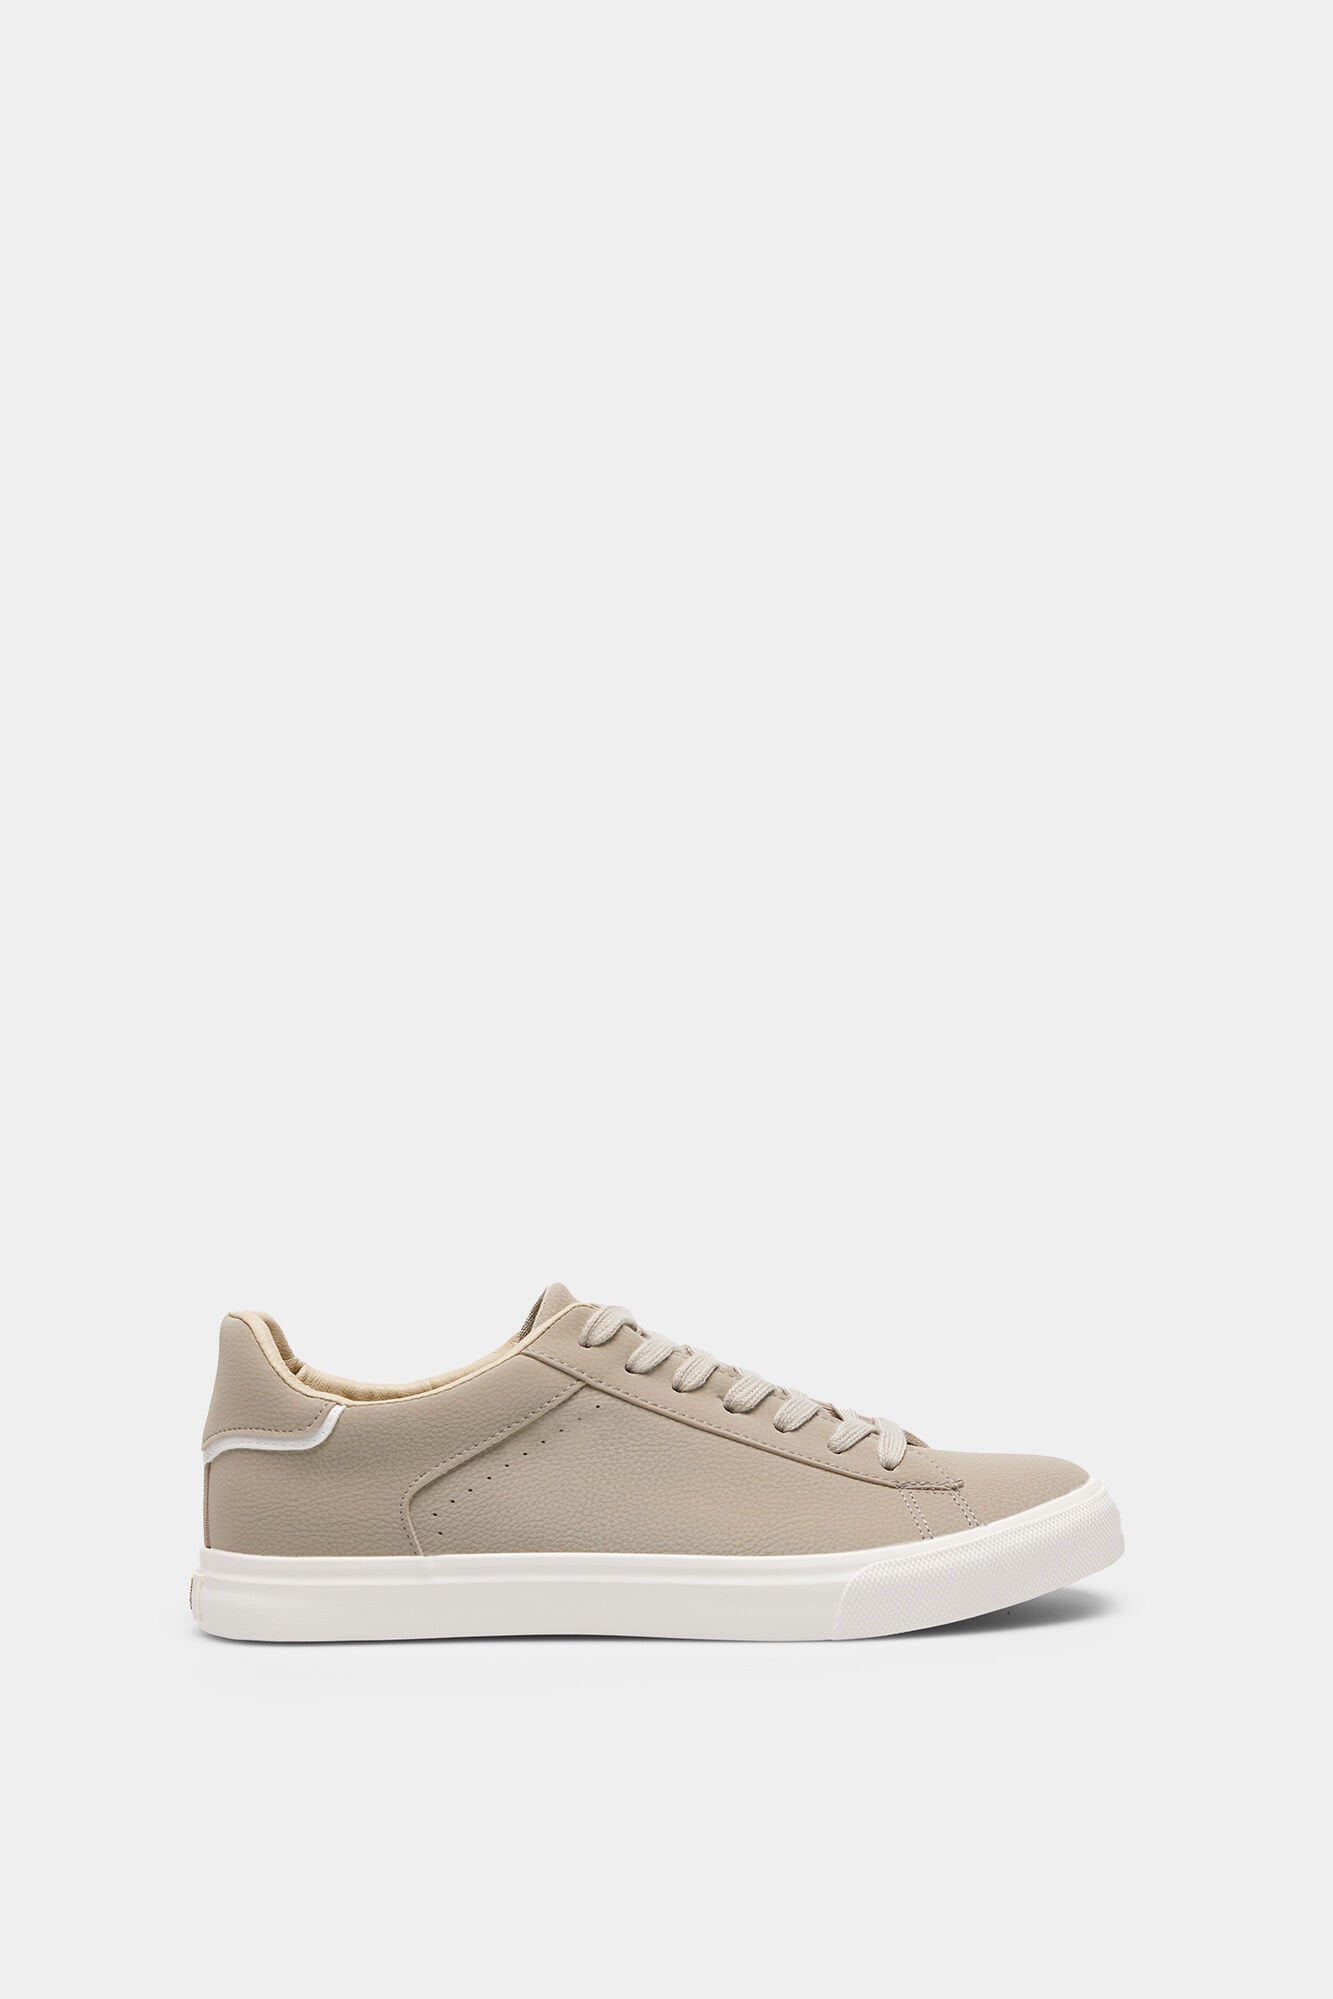 Beige Lace Up Trainers With White Sole_2997584_41_07